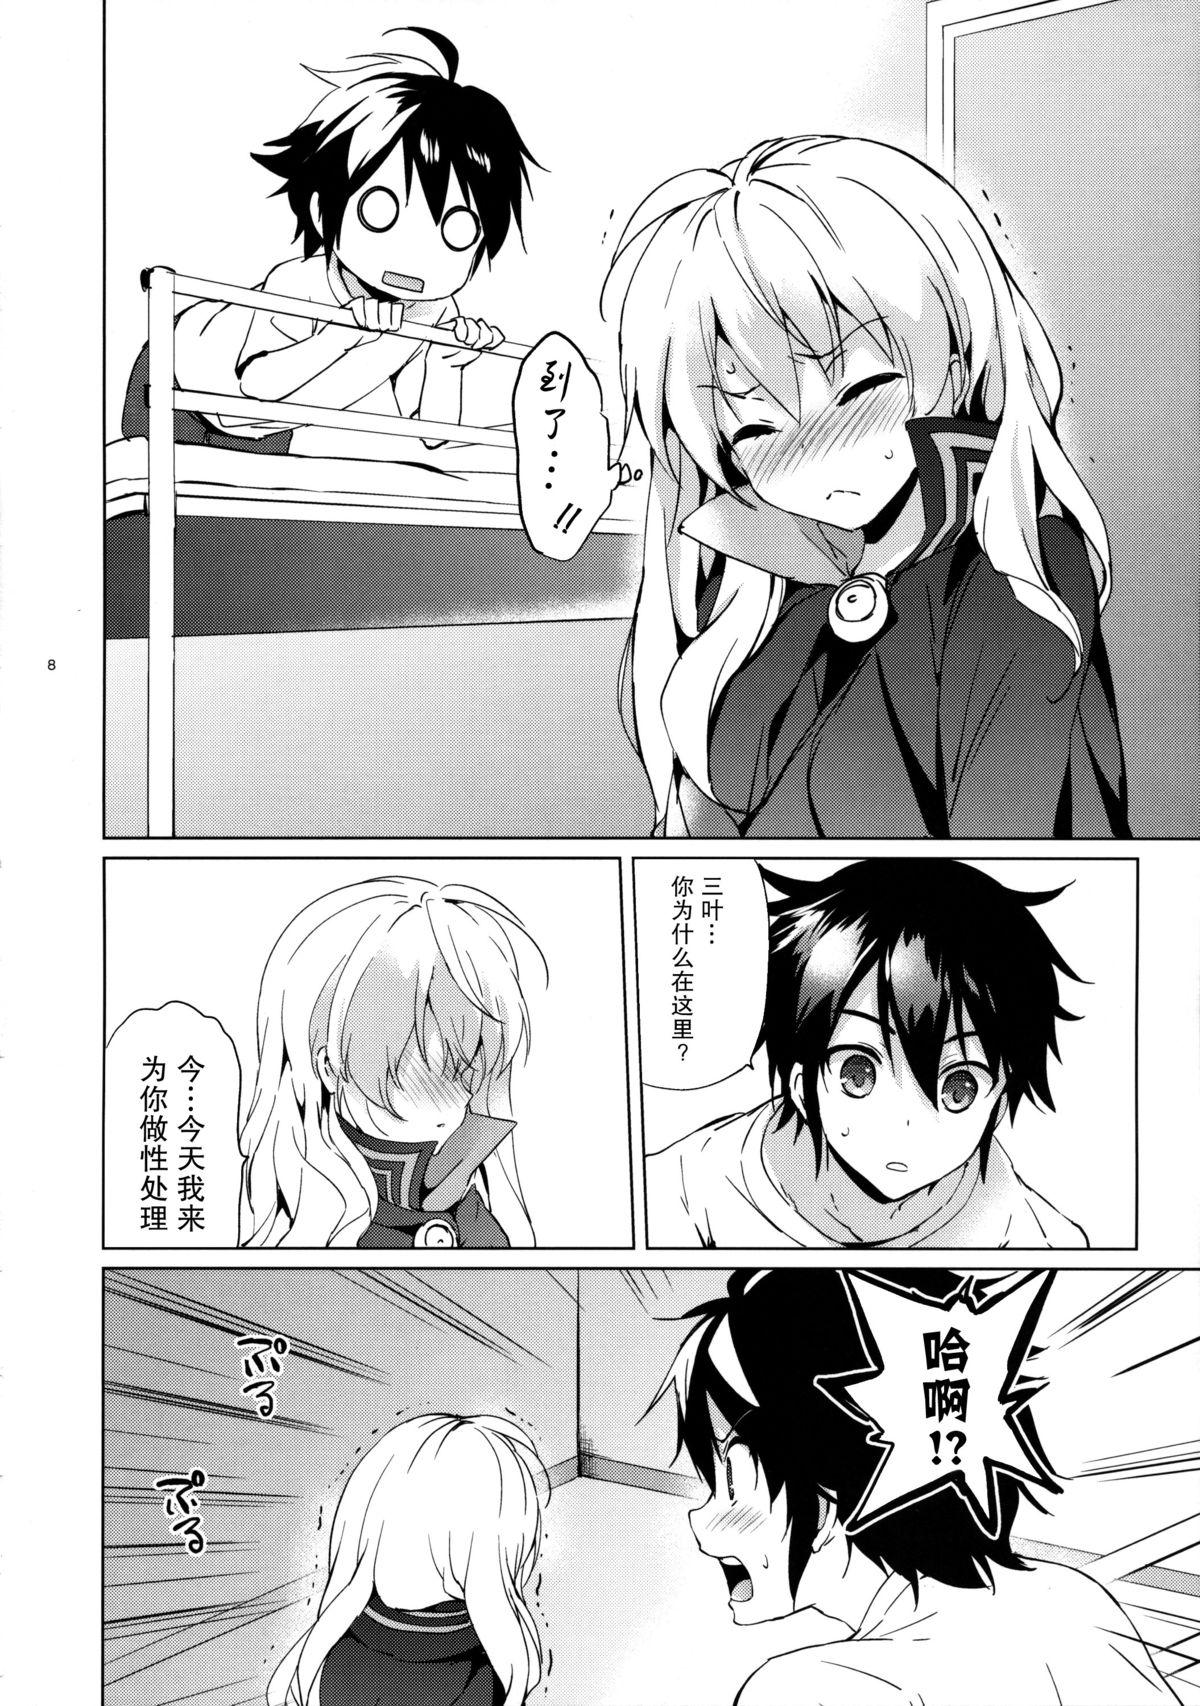 Web Cam Mitsuba Love Story - Seraph of the end Ex Girlfriend - Page 7